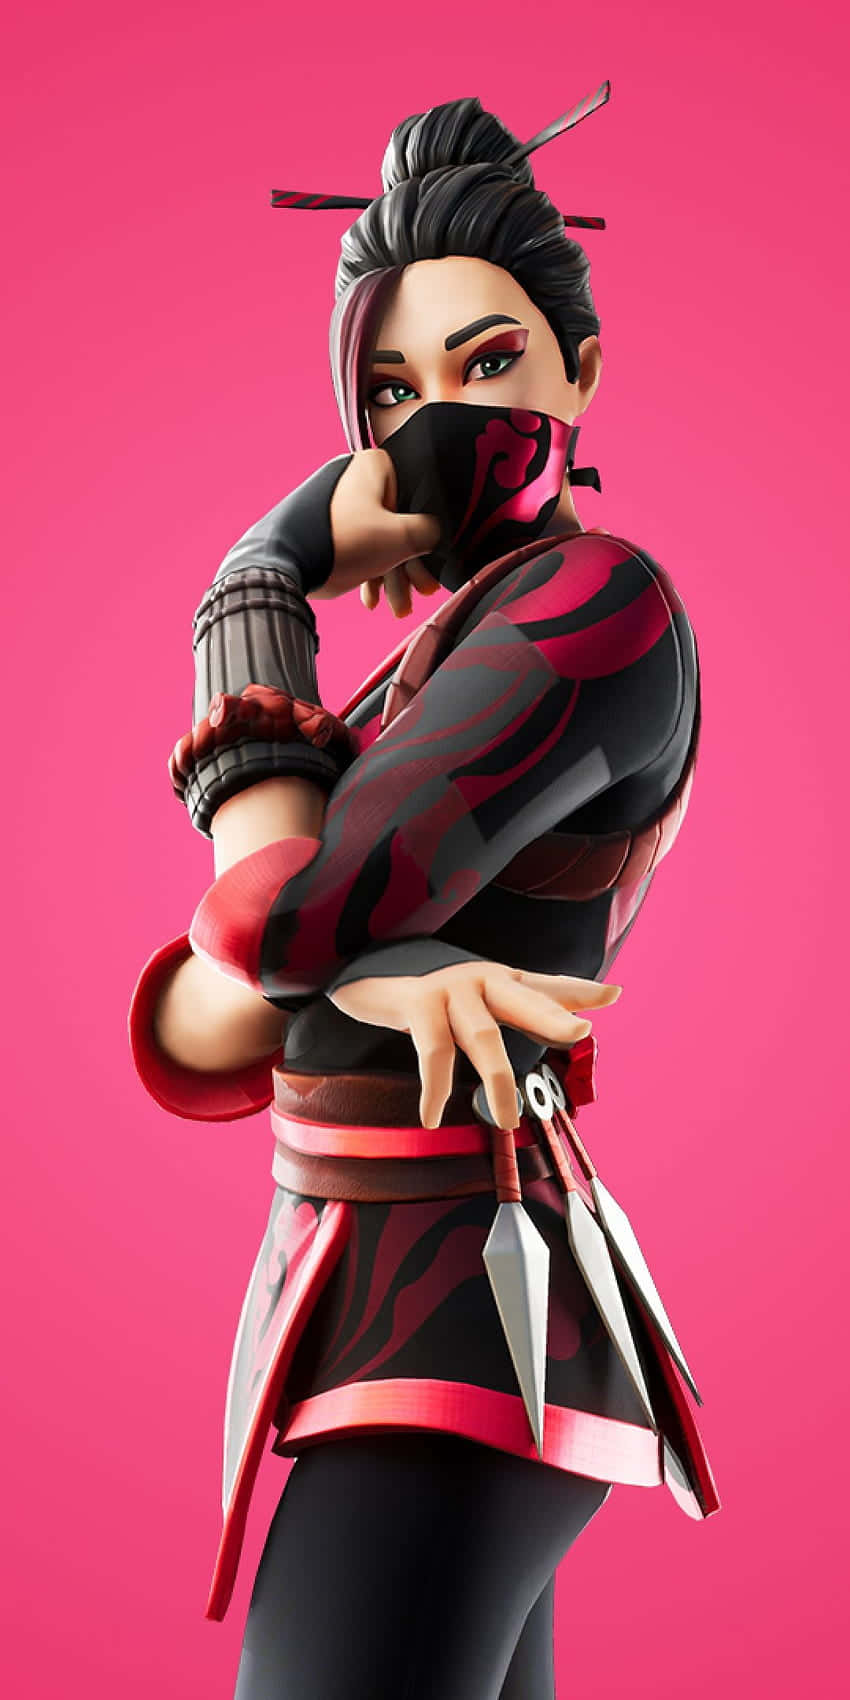 Play as Ruby with the new Fortnite Skin! Wallpaper